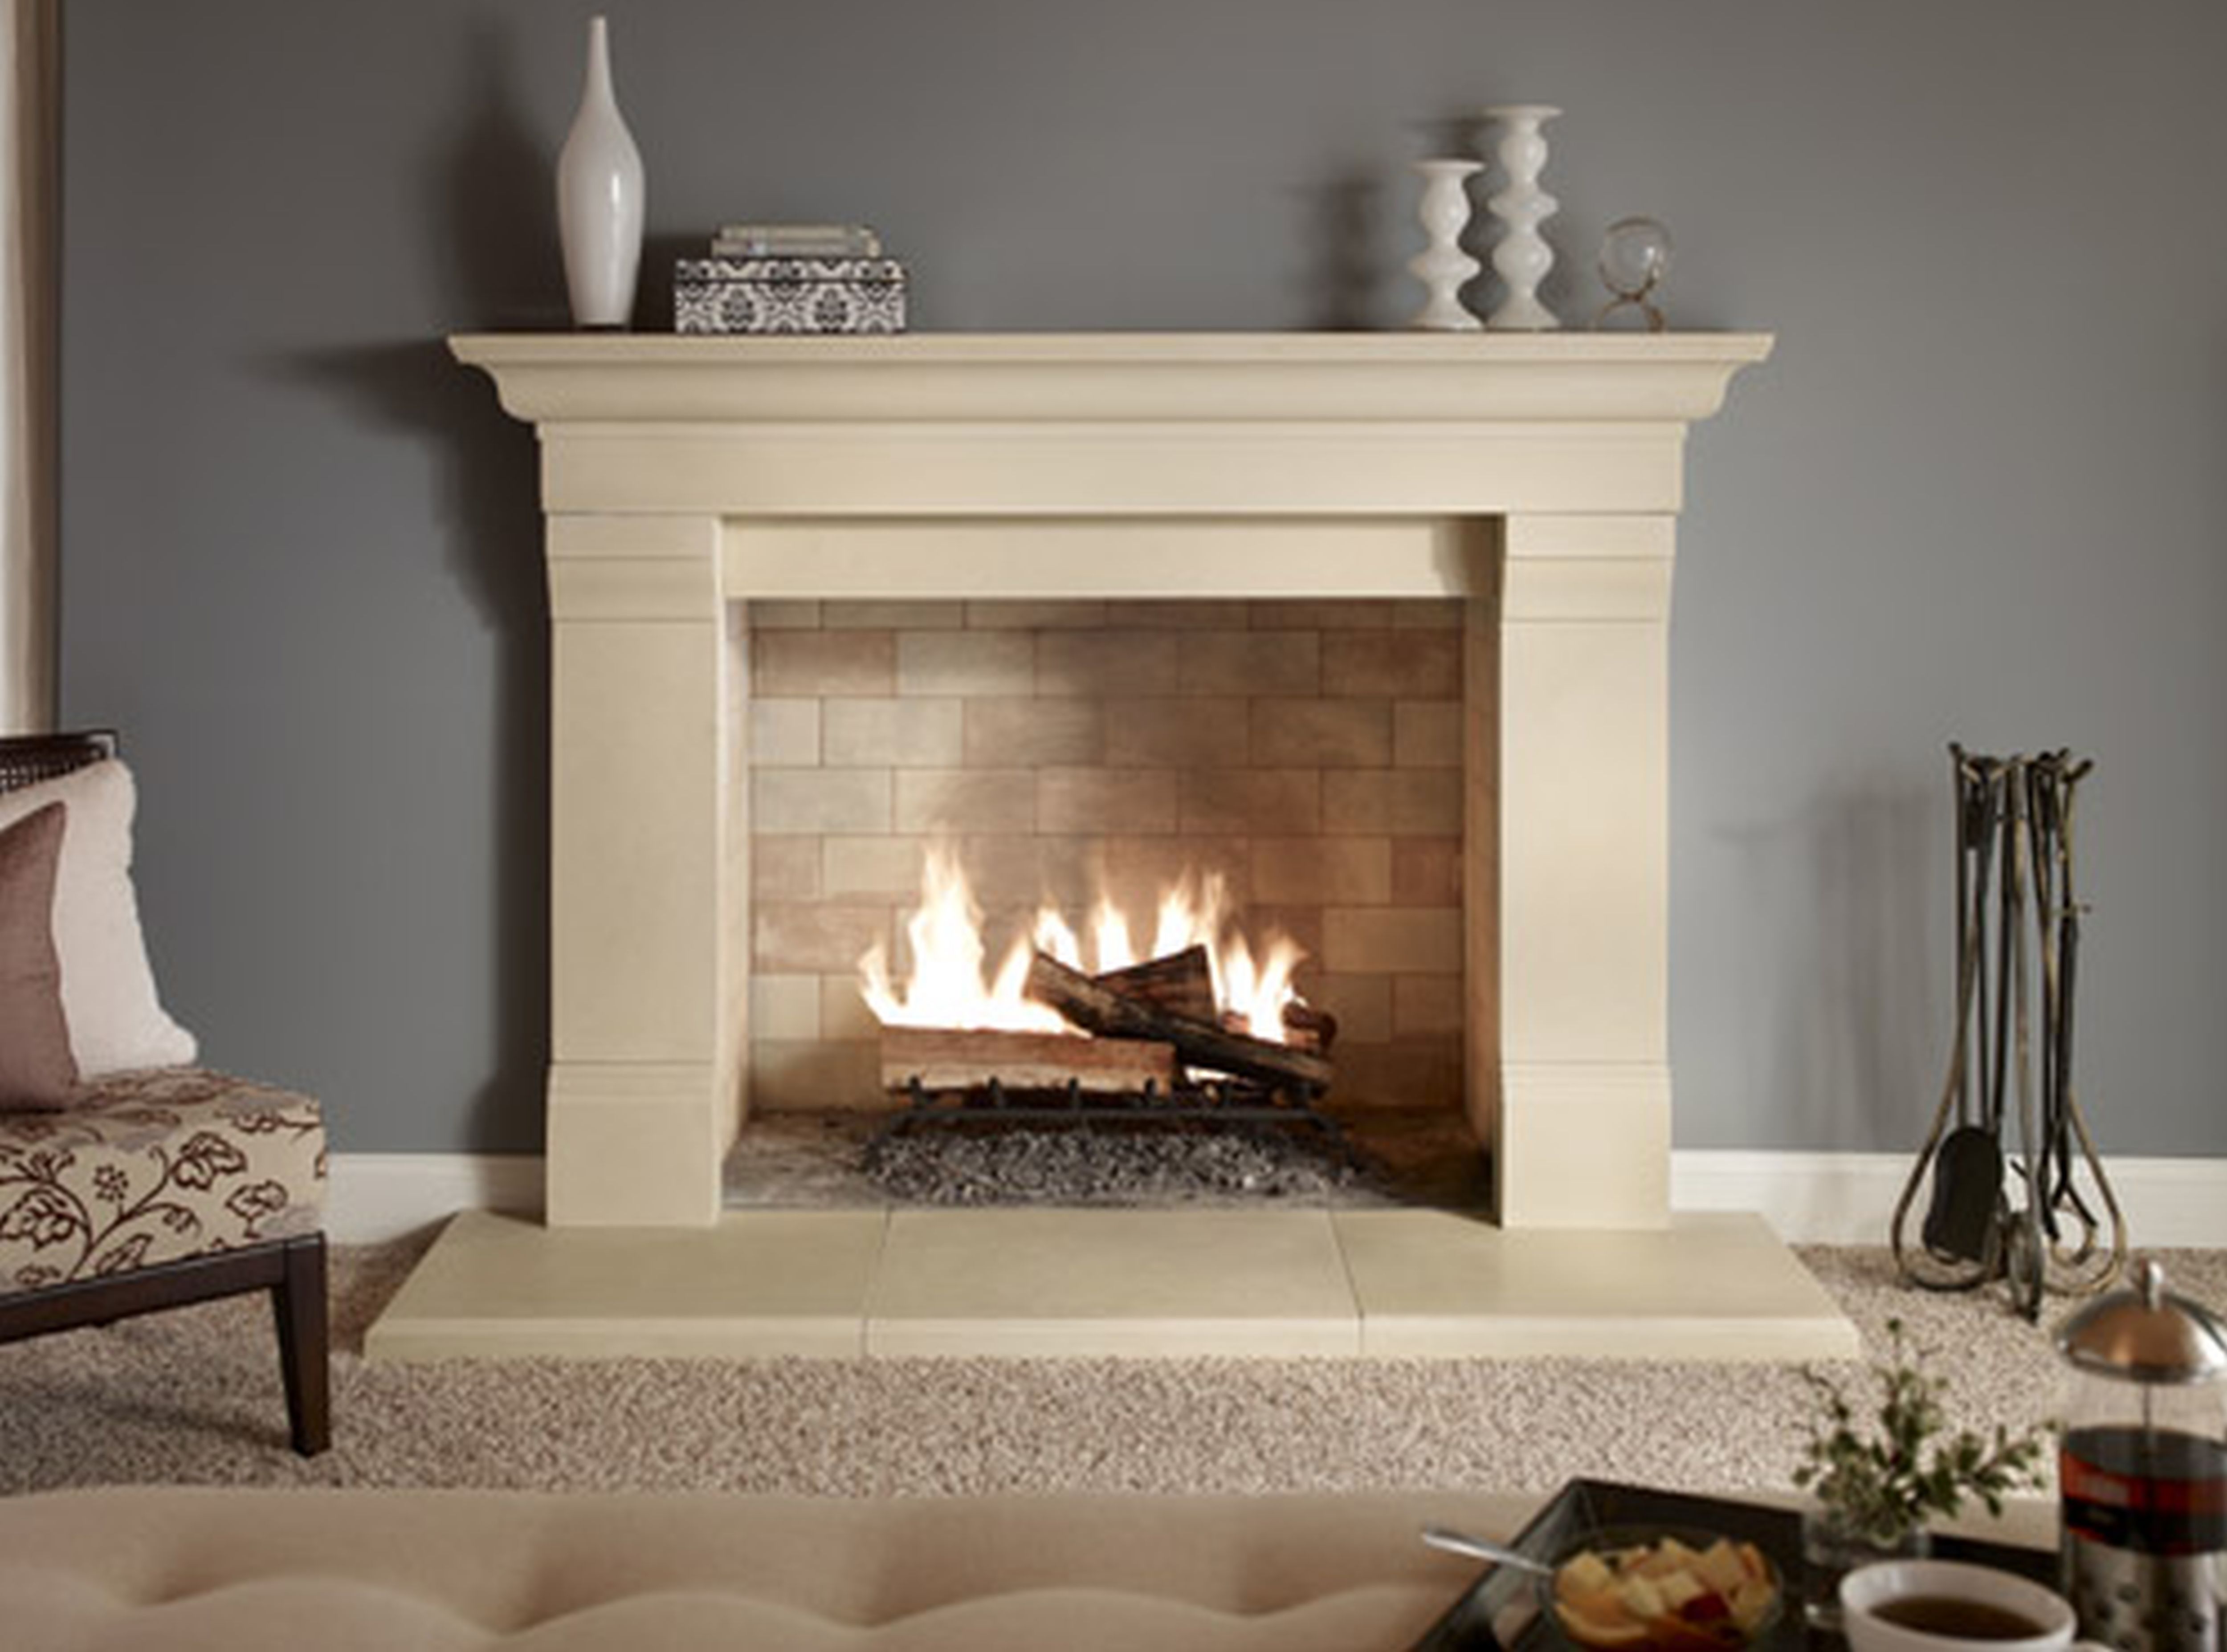 energy-efficient gas fireplace in the living room